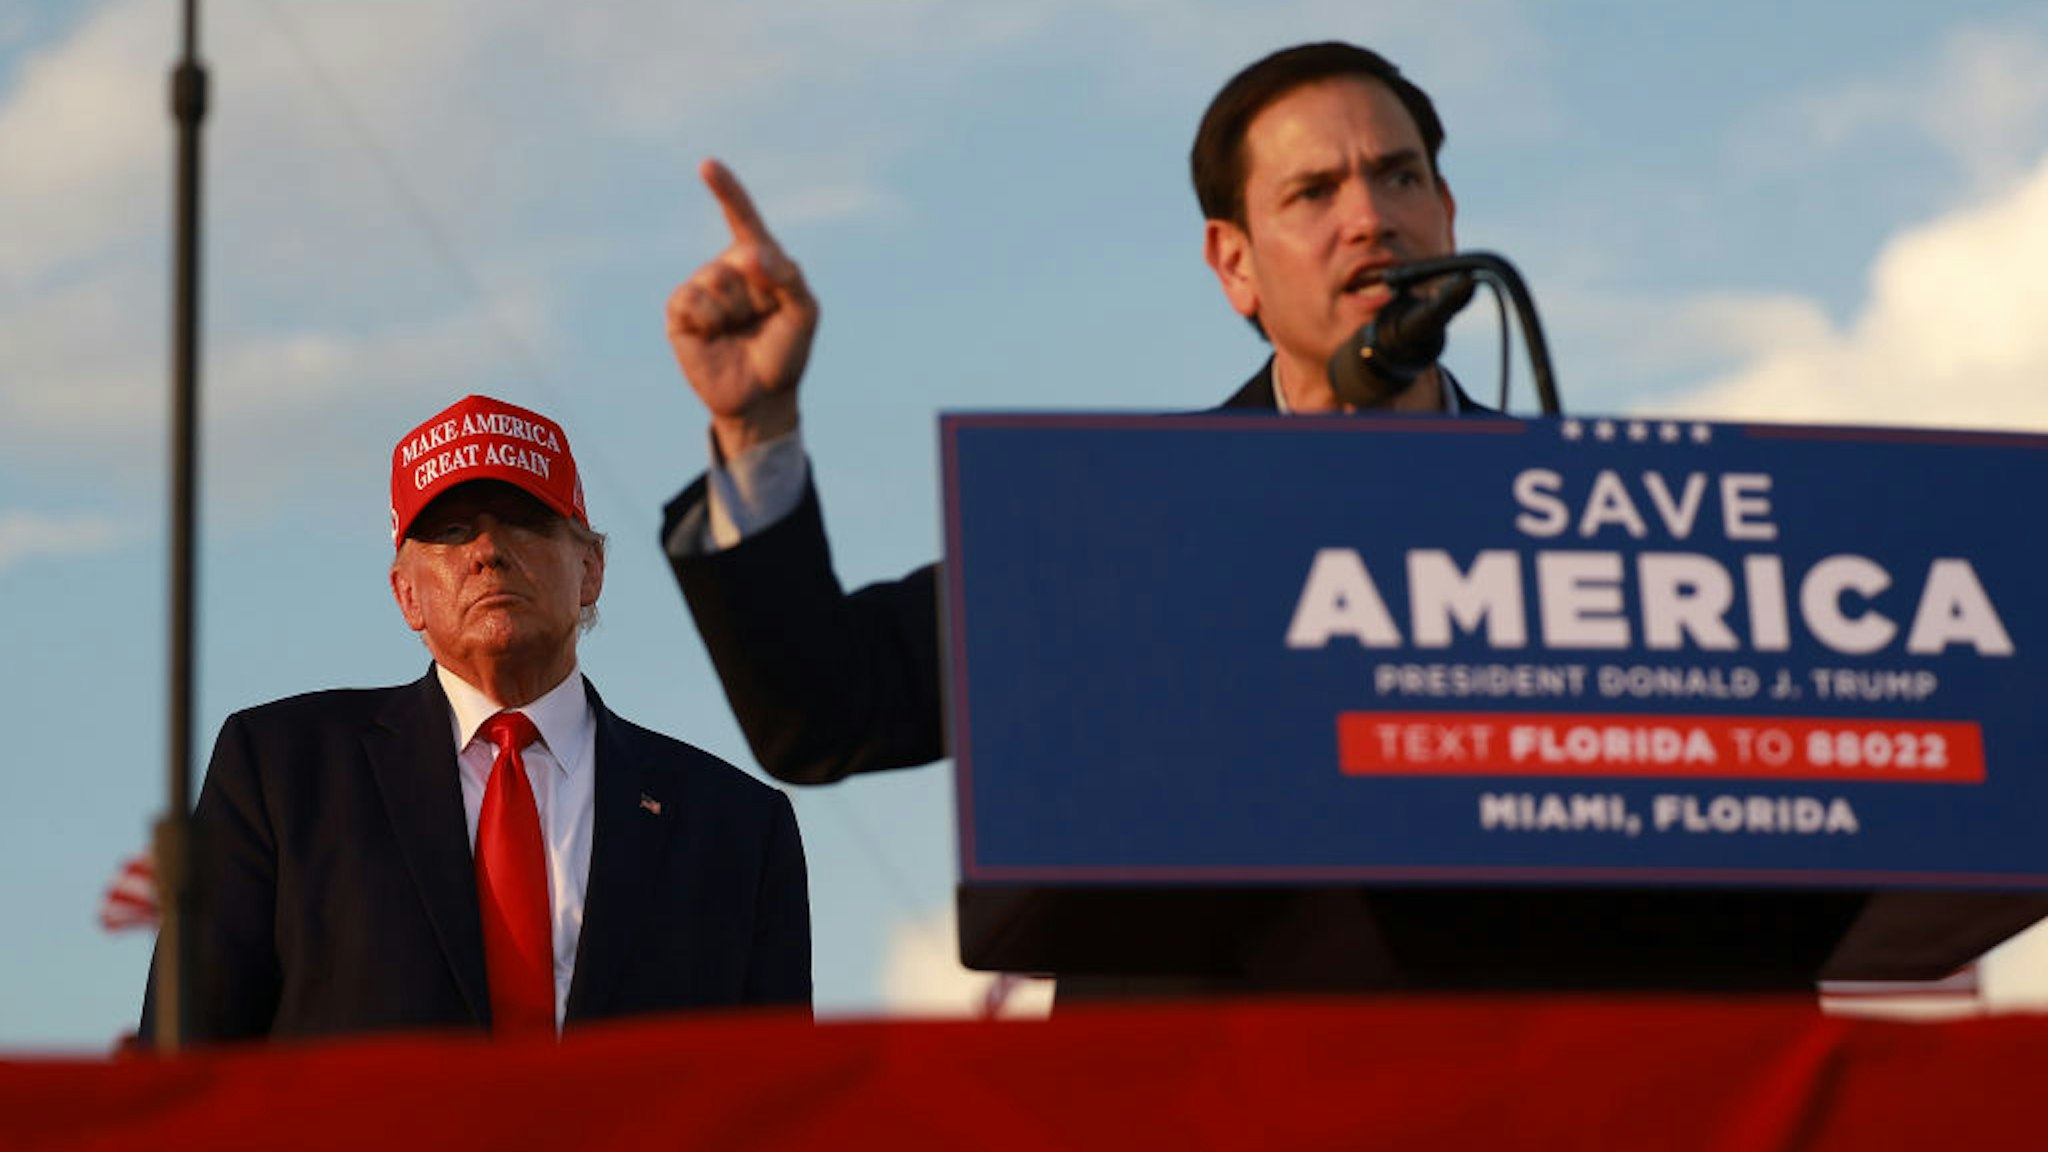 MIAMI, FLORIDA - NOVEMBER 06: Former U.S. President Donald Trump listens as Sen. Marco Rubio (R-FL) speaks during a rally at the Miami-Dade County Fair and Exposition on November 6, 2022 in Miami, Florida. Rubio faces U.S. Rep. Val Demings (D-FL) in his reelection bid in Tuesday's general election.